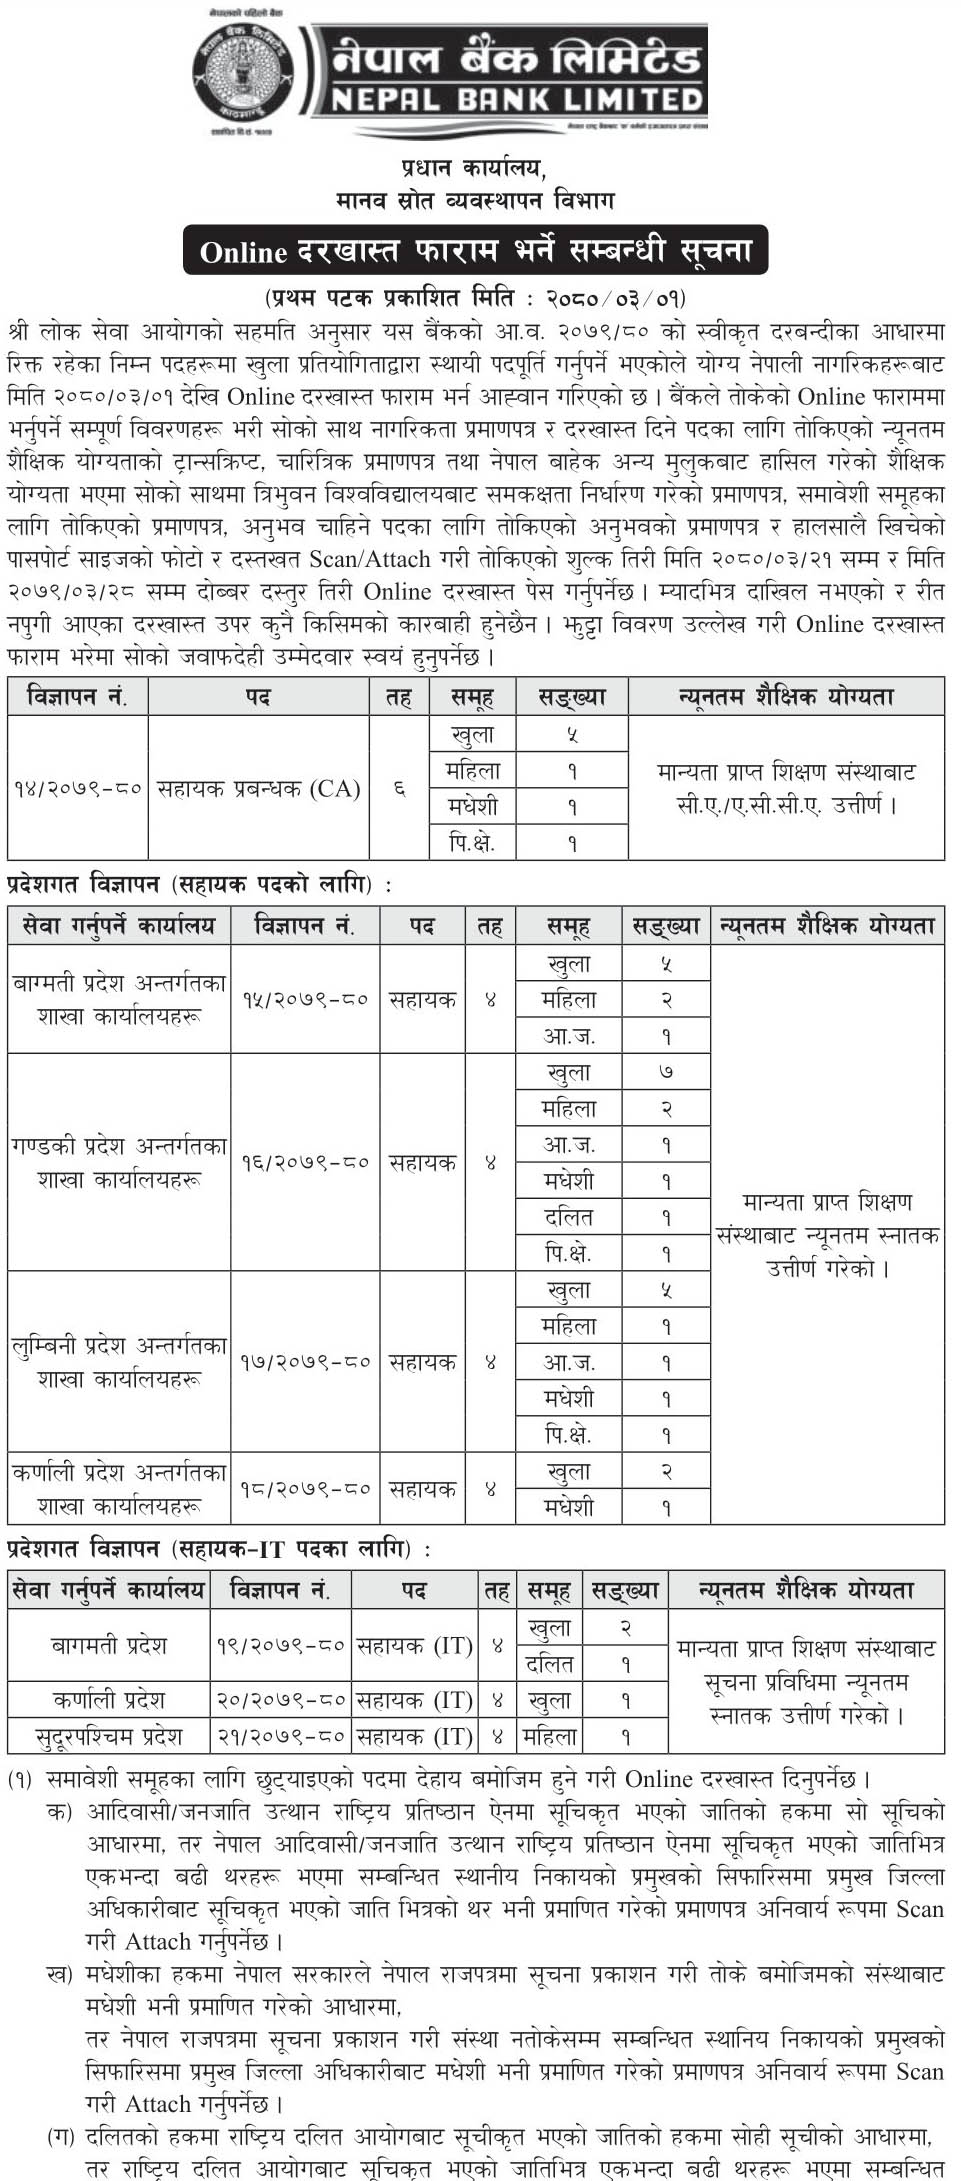 Nepal Bank Limited(NBL) has advertised for the recruitment of posts through open and inclusive competitive examination.